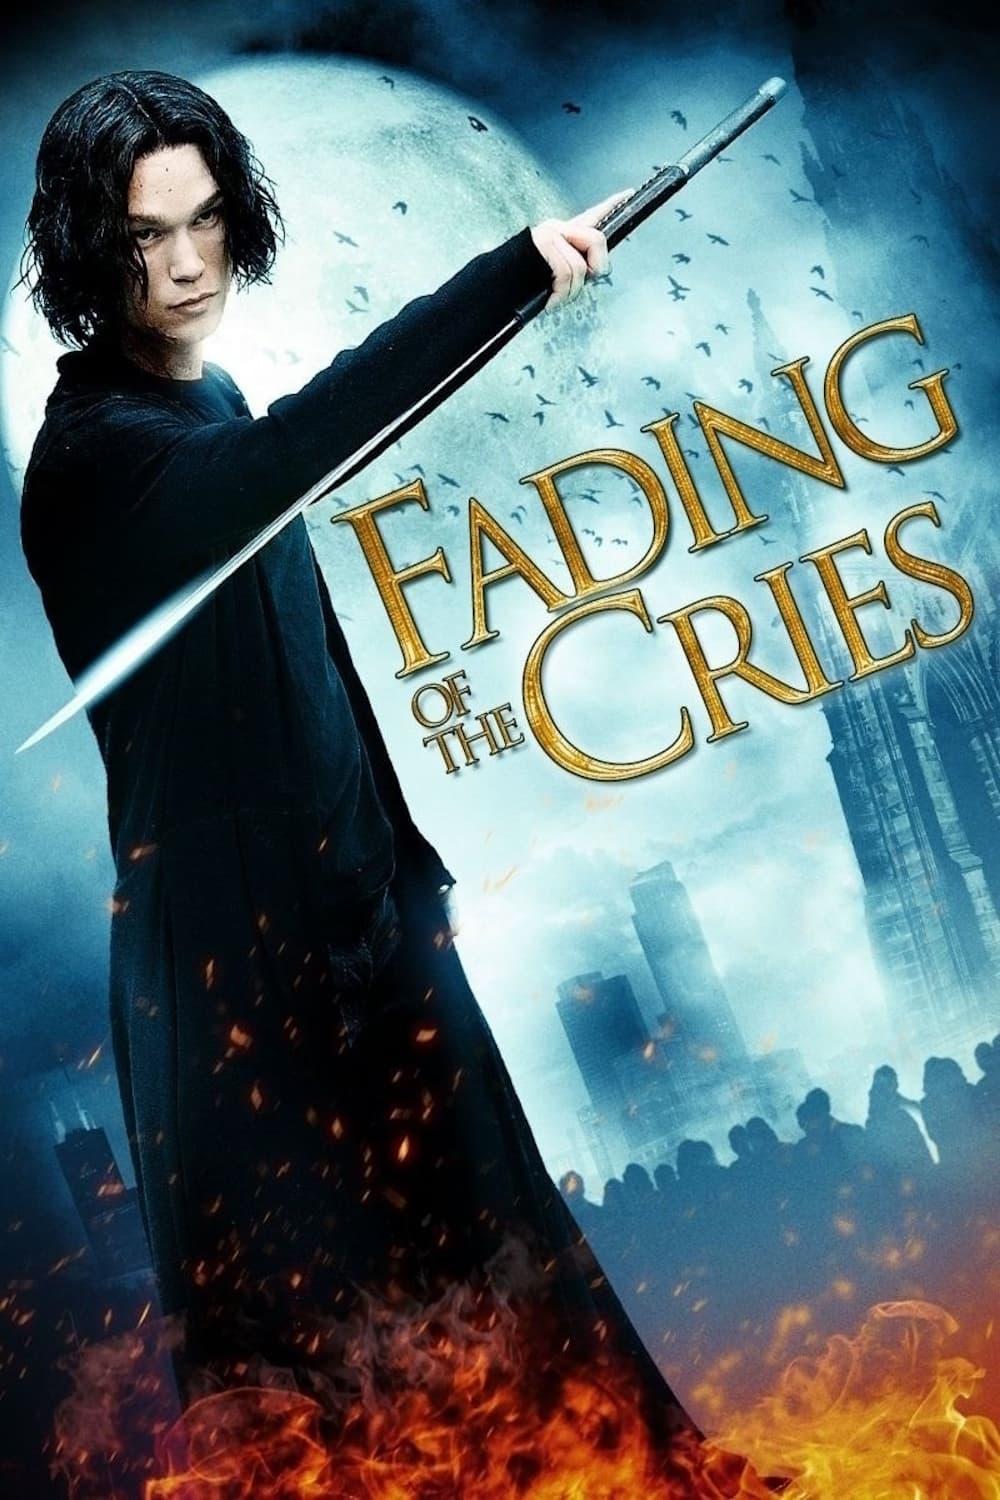 Fading of the Cries poster